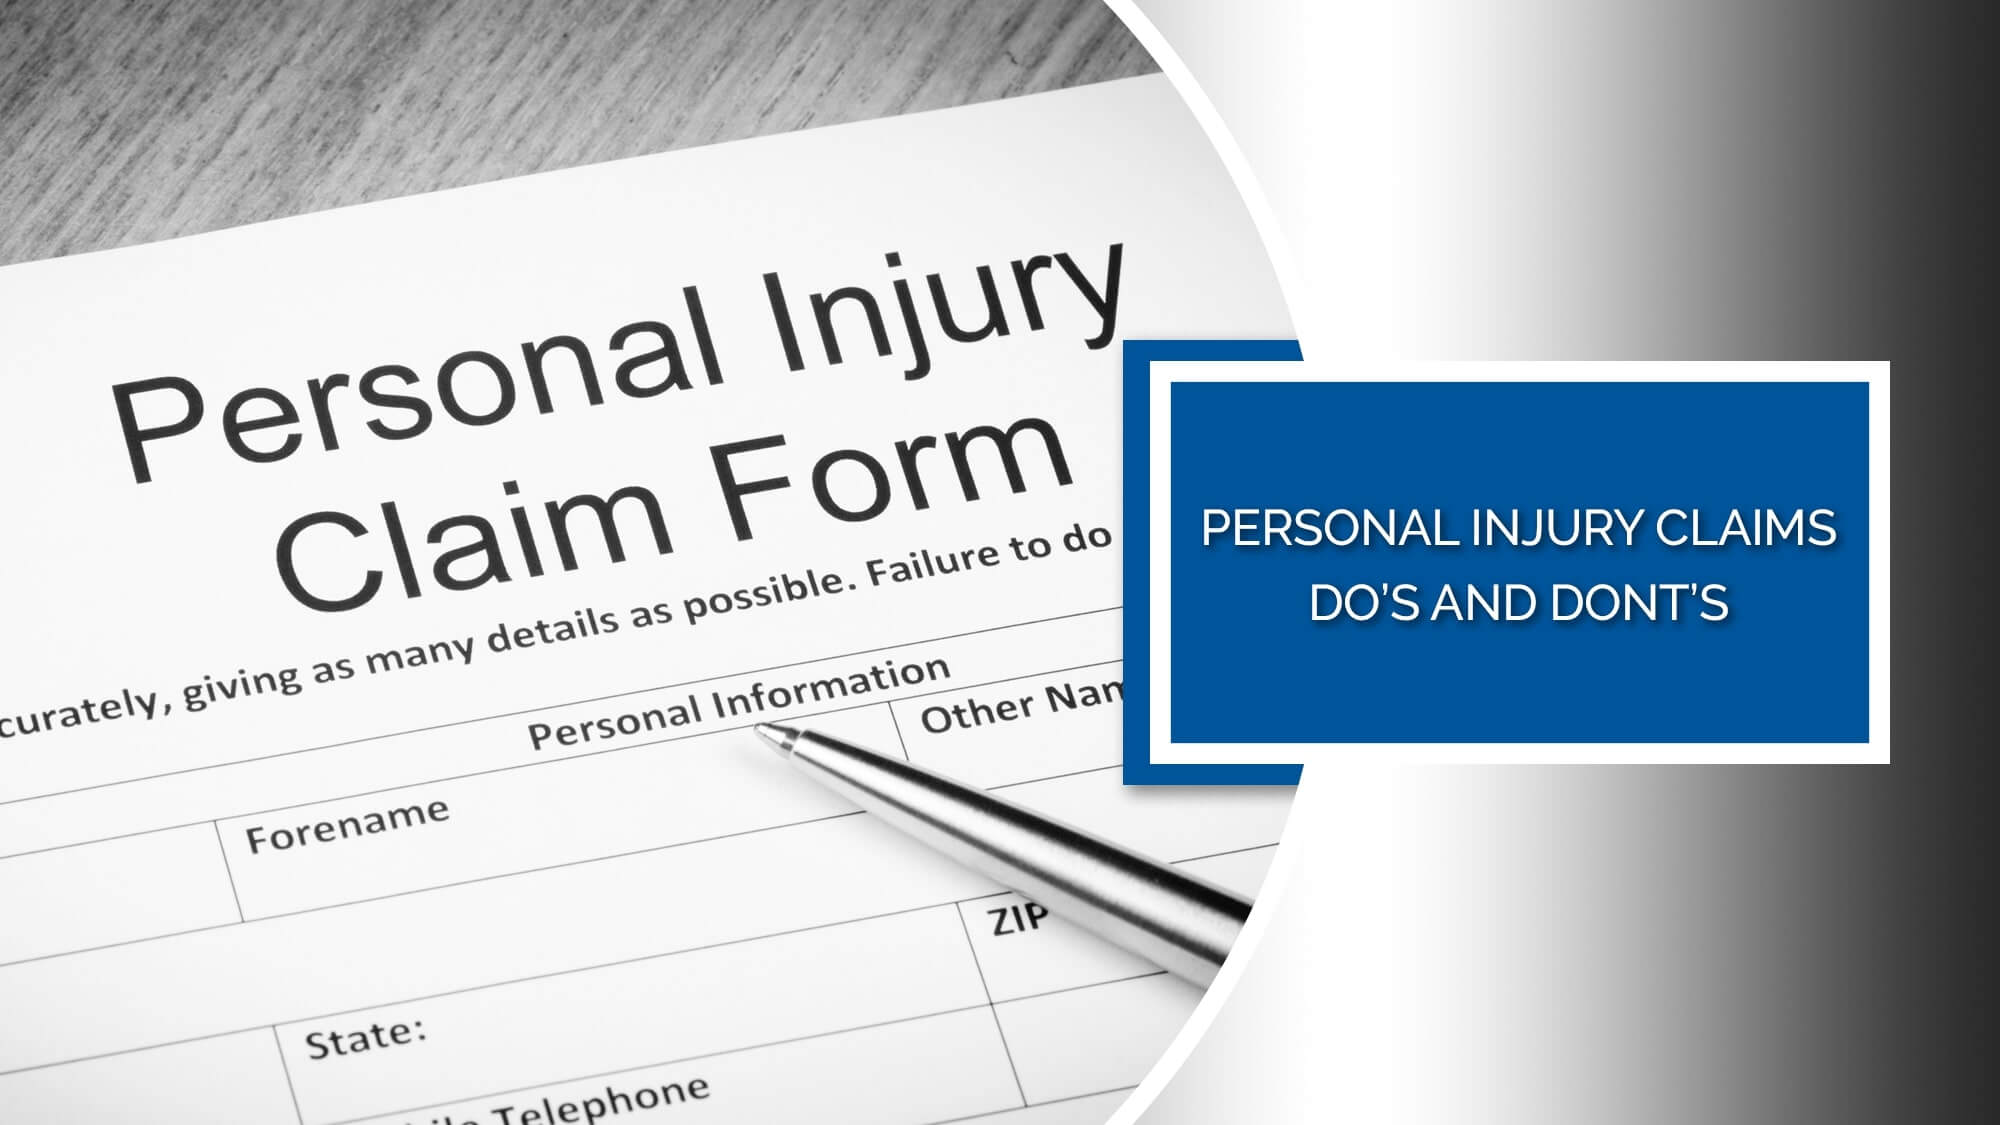 personal injury do's and dont's header image